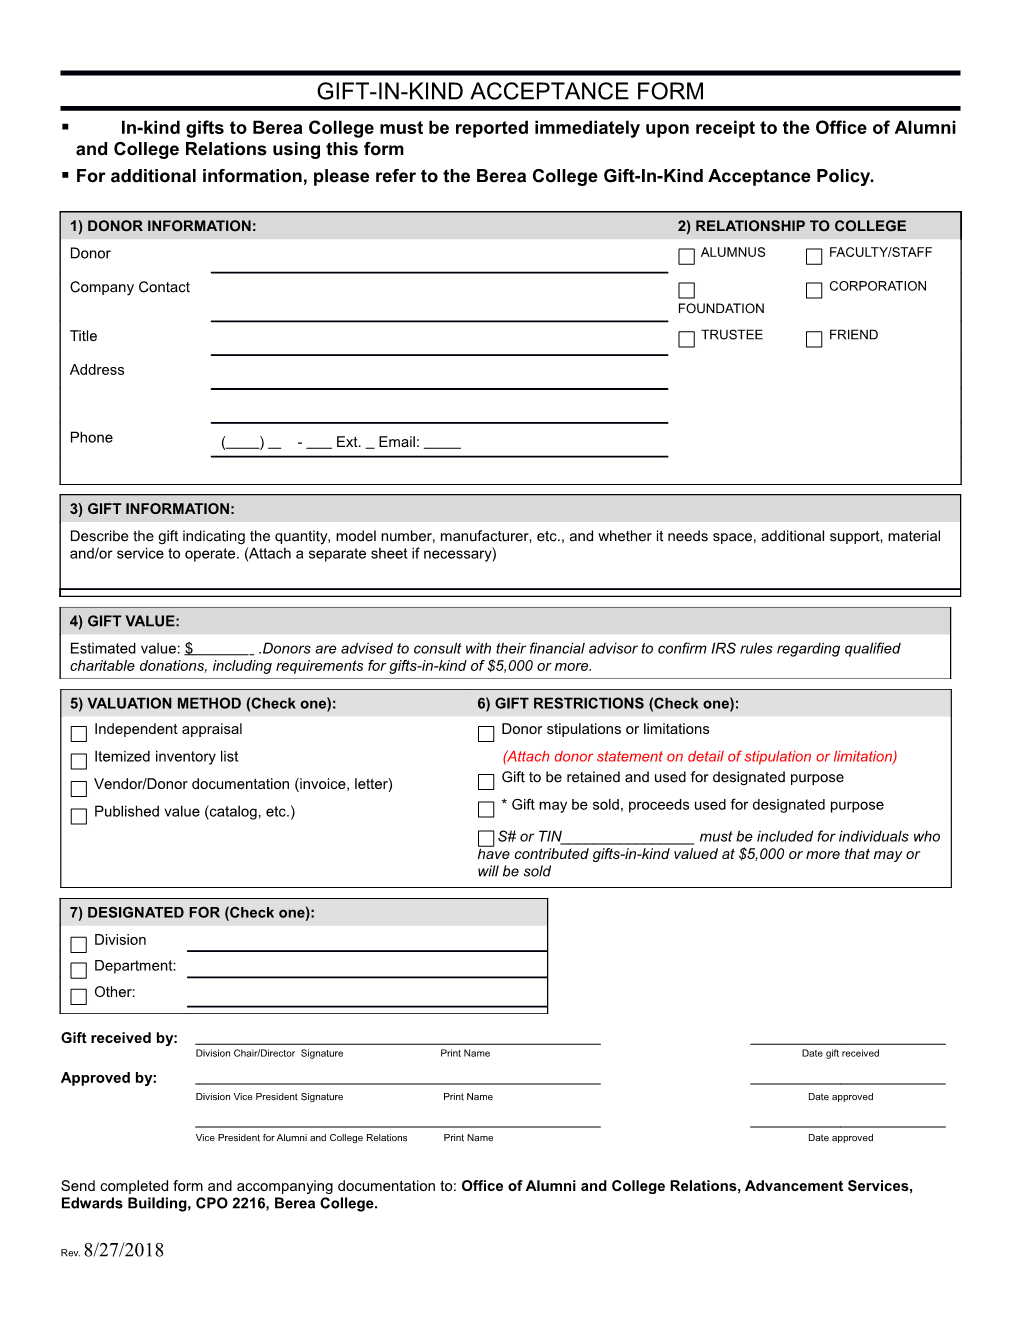 Gift-In-Kind Acceptance Form